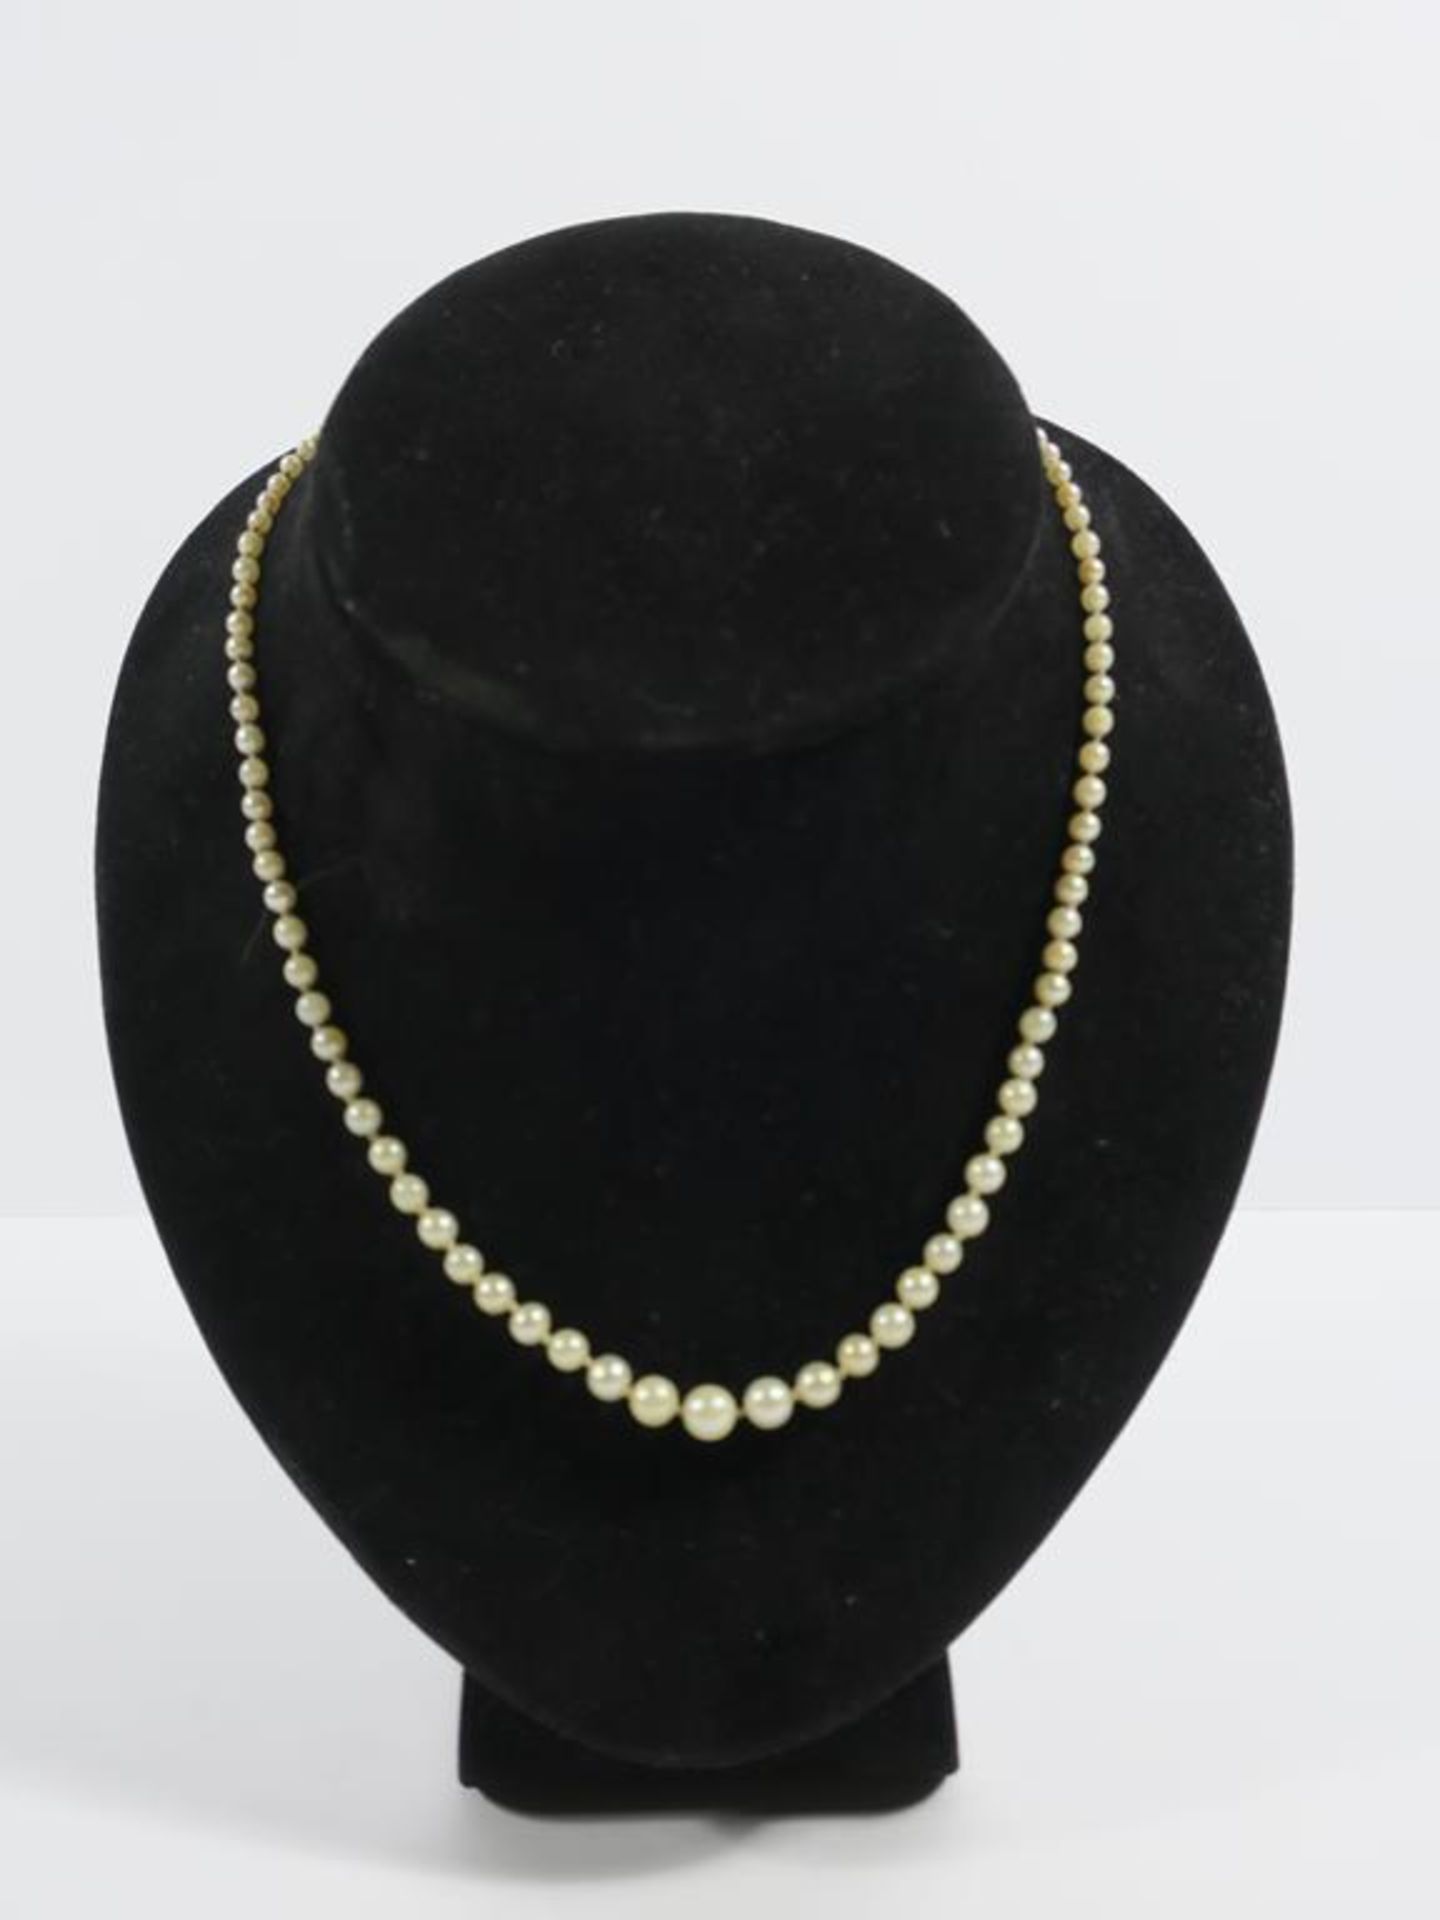 A Stringed Pearl Necklace with Silver coloured and Gemstone Clasp. (Est £20-£50)